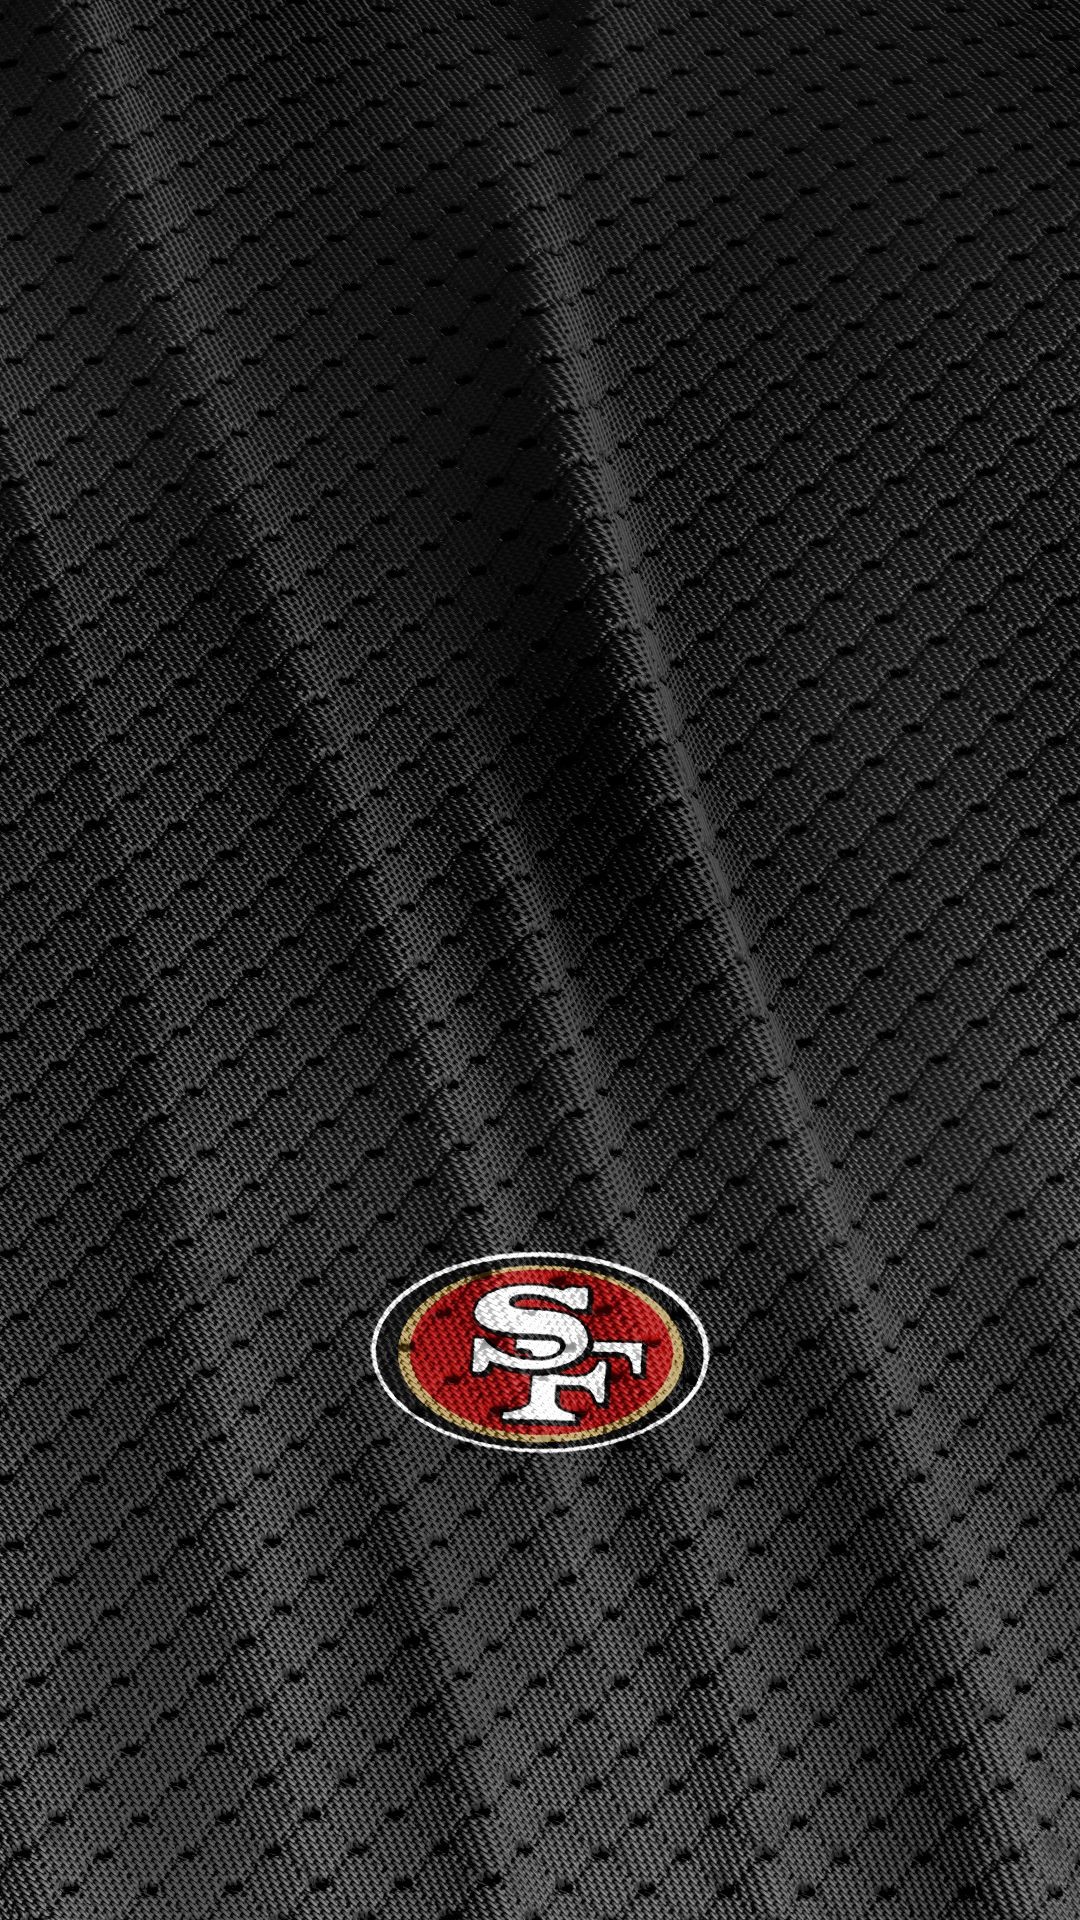 Download The Official Logo of the San Francisco 49ers Wallpaper  Wallpapers com